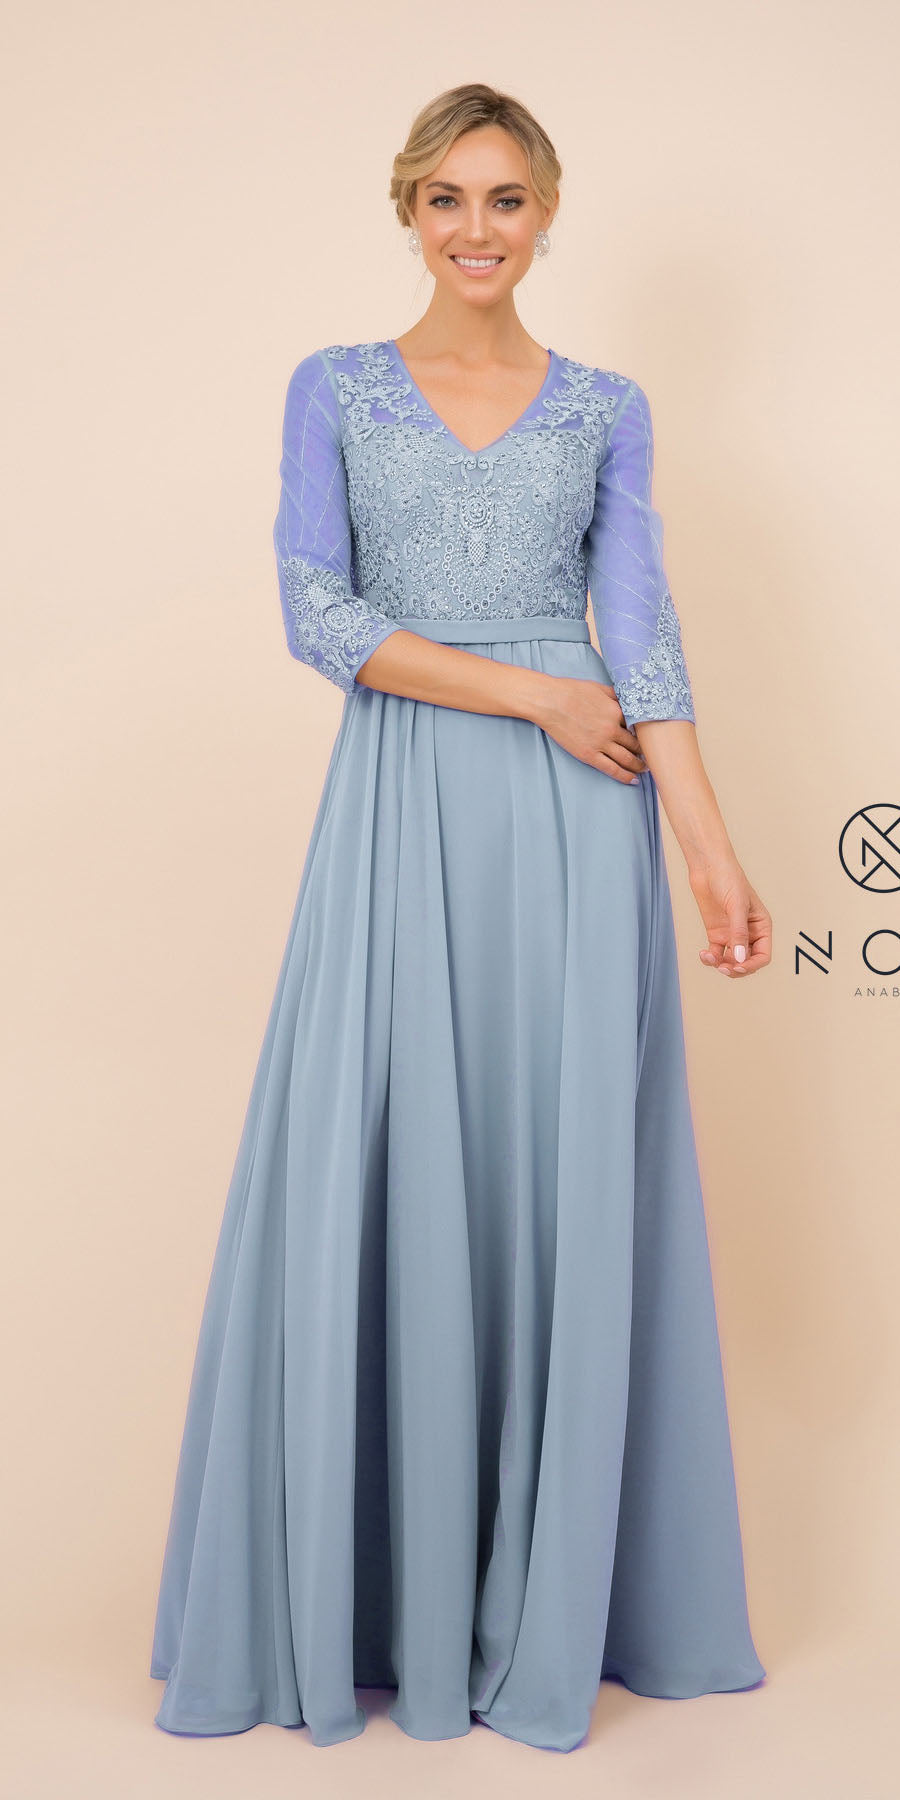 Dusty Blue Mother of the Bride Dresses